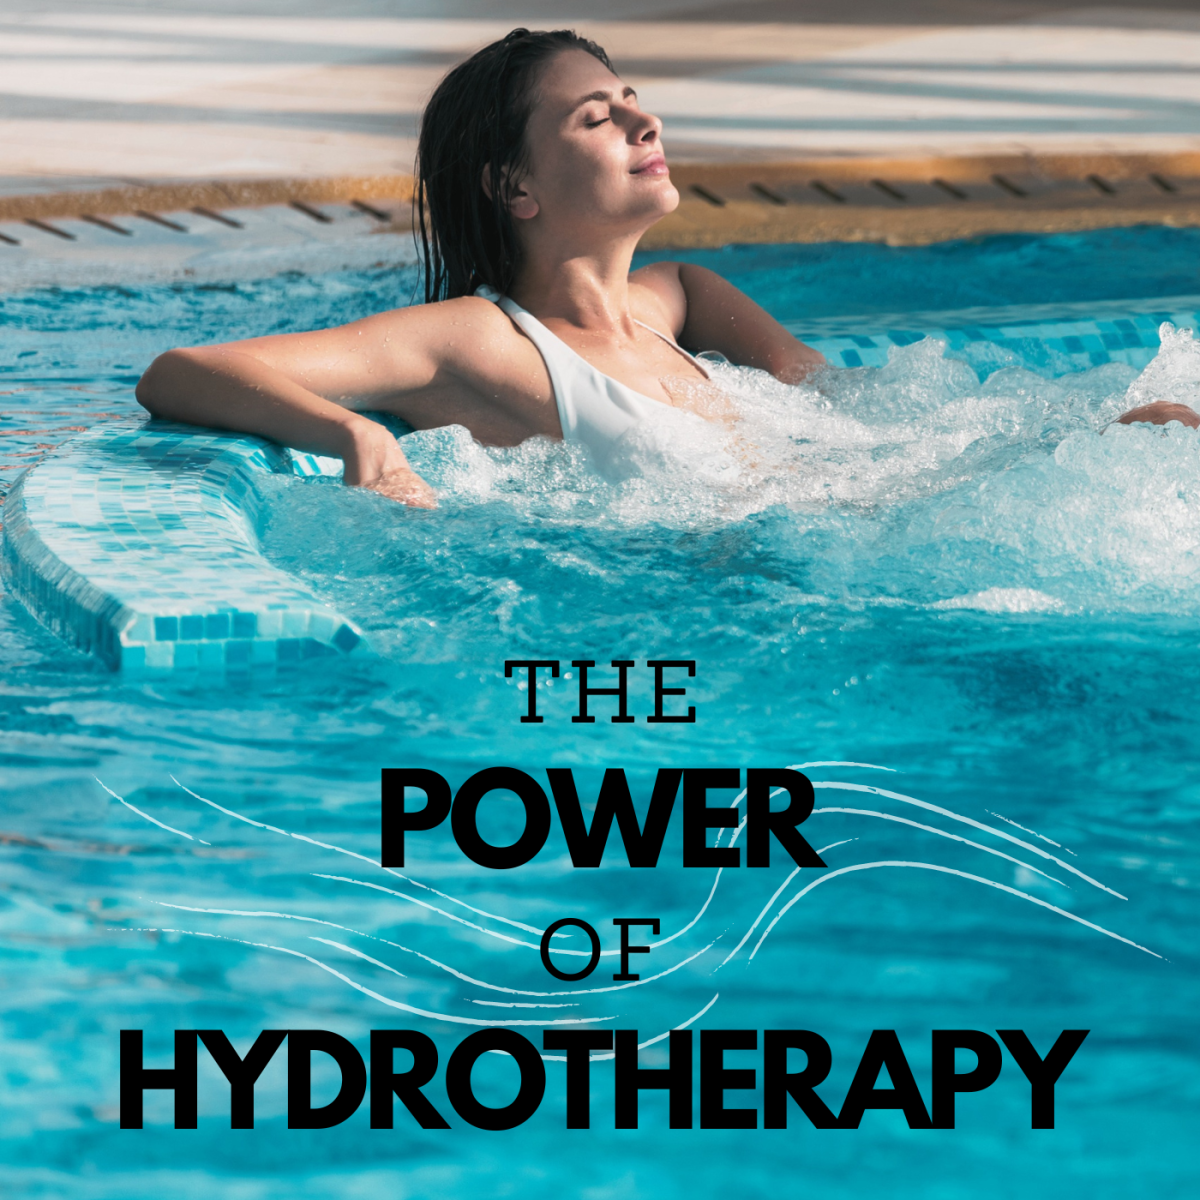 Hydrotherapy: It Can Do Your Body Good